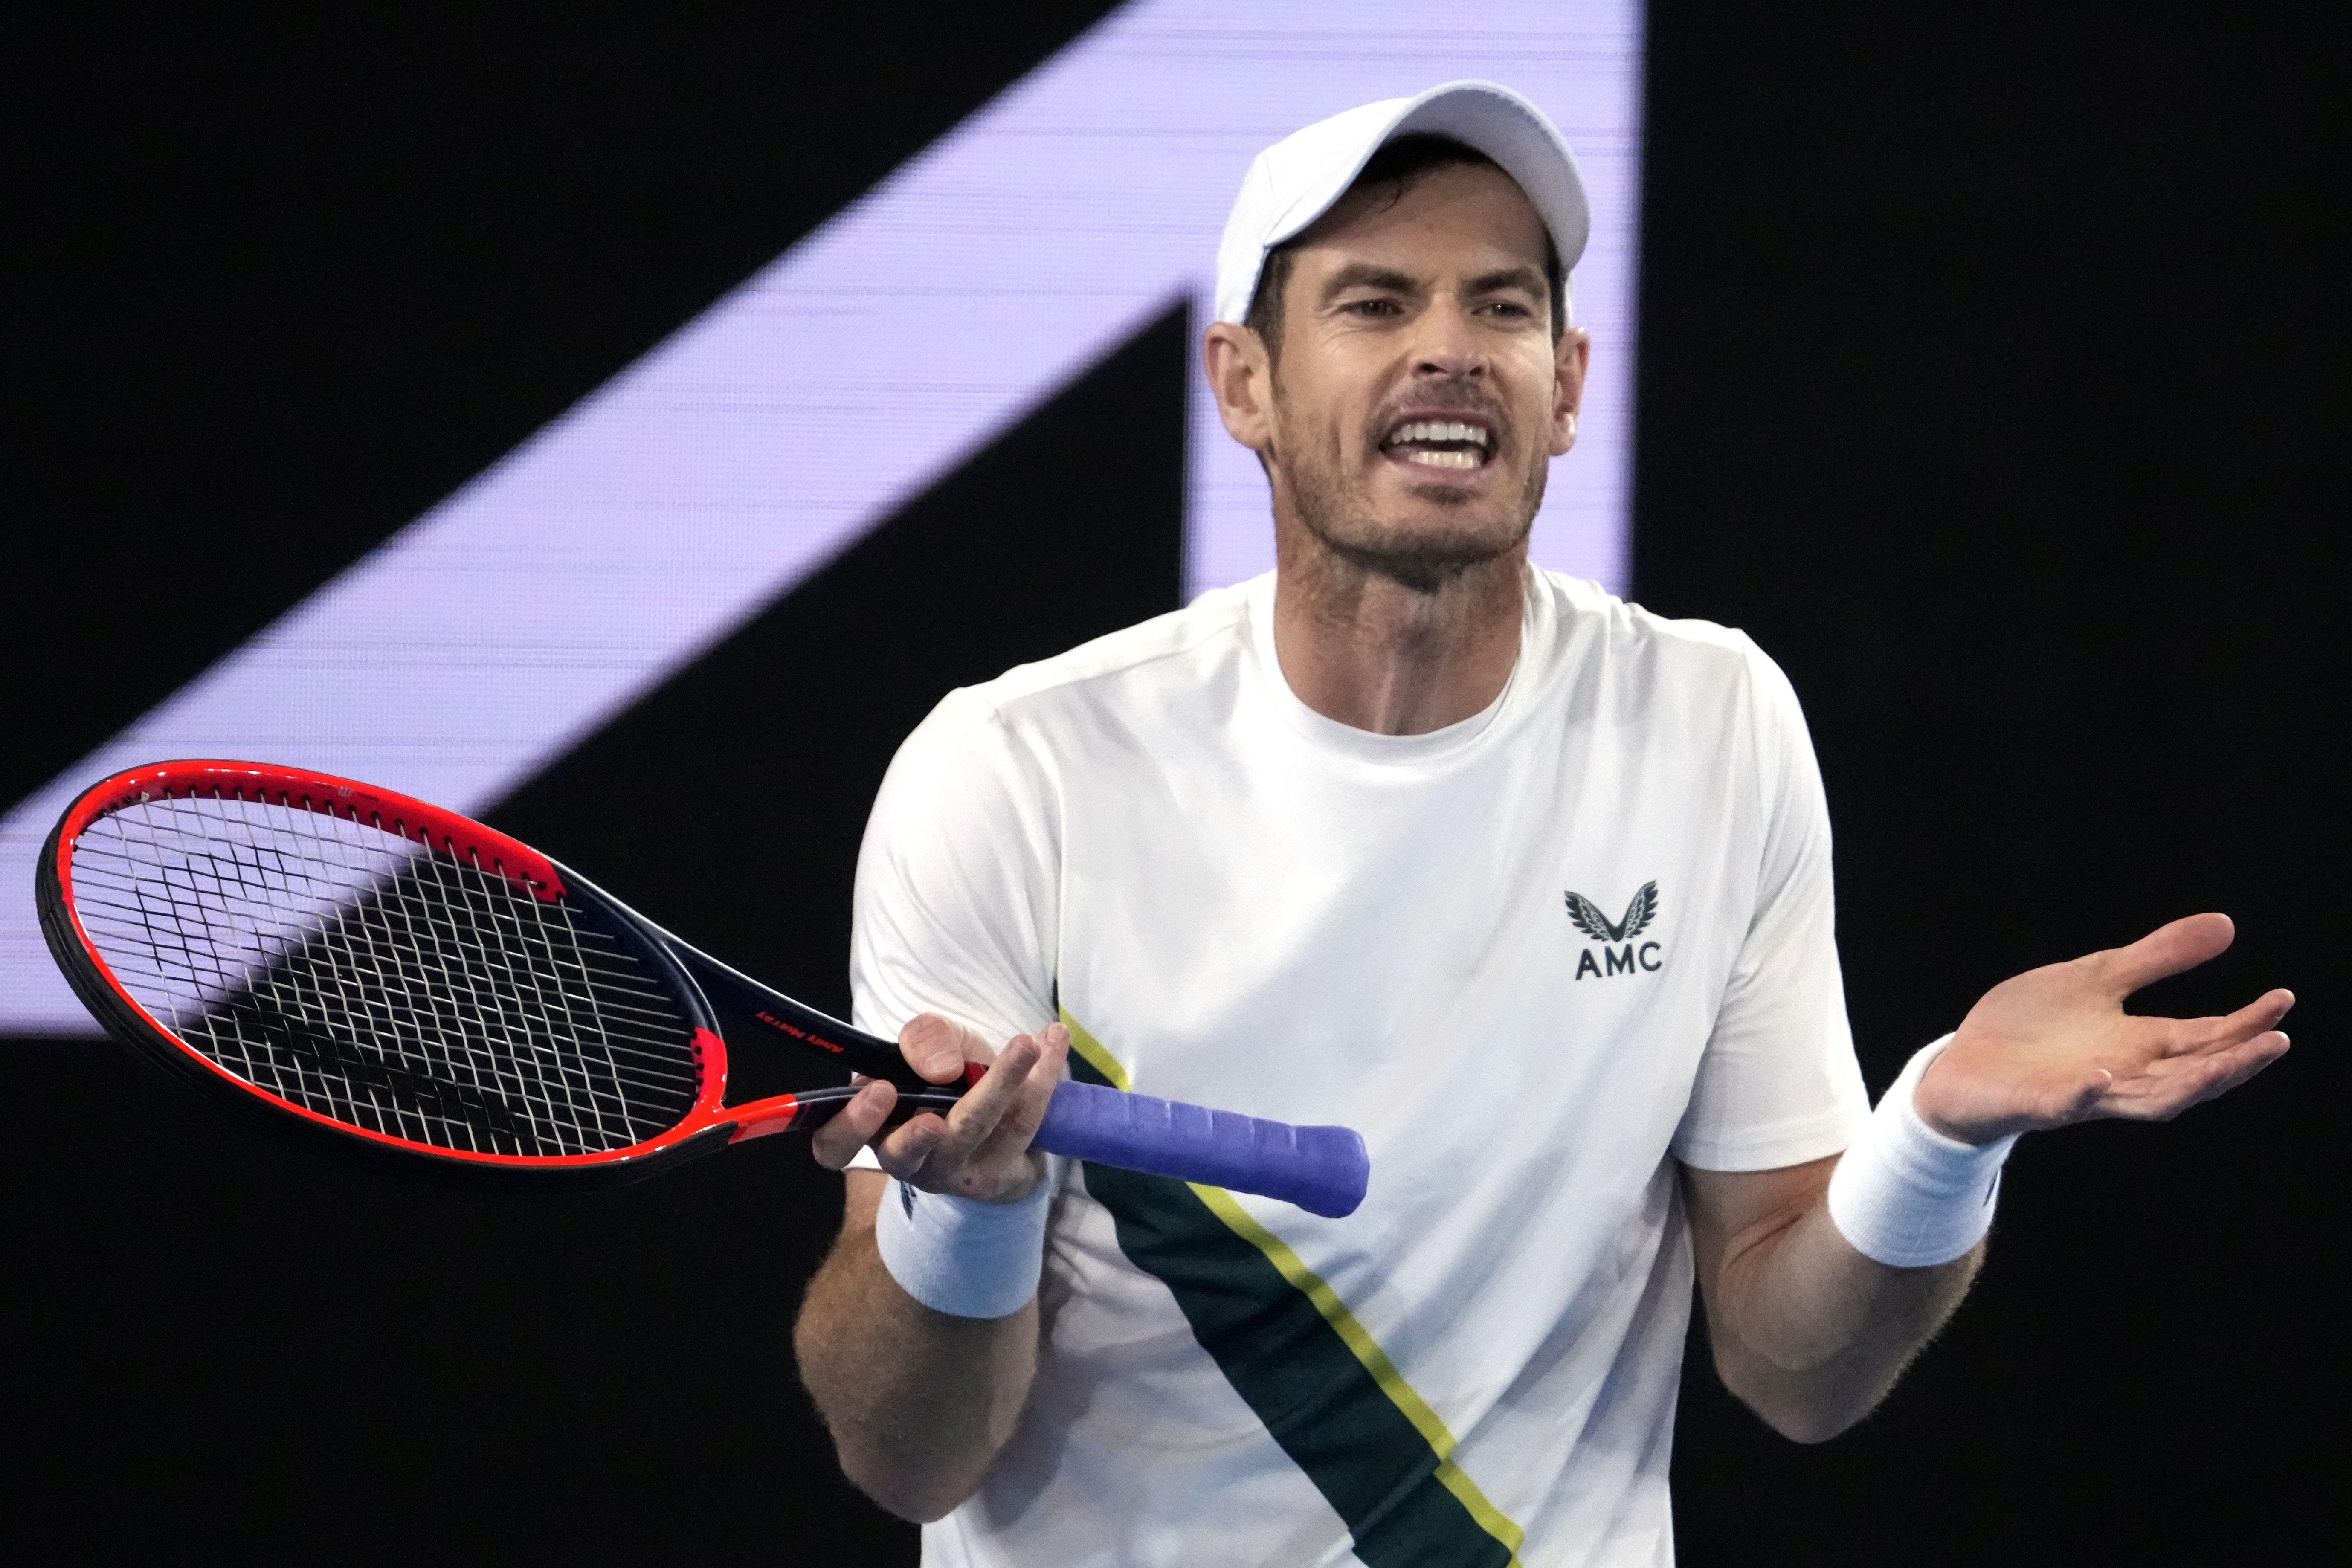 Tennis Andy Murray criticises Australian Open scheduling after epic win